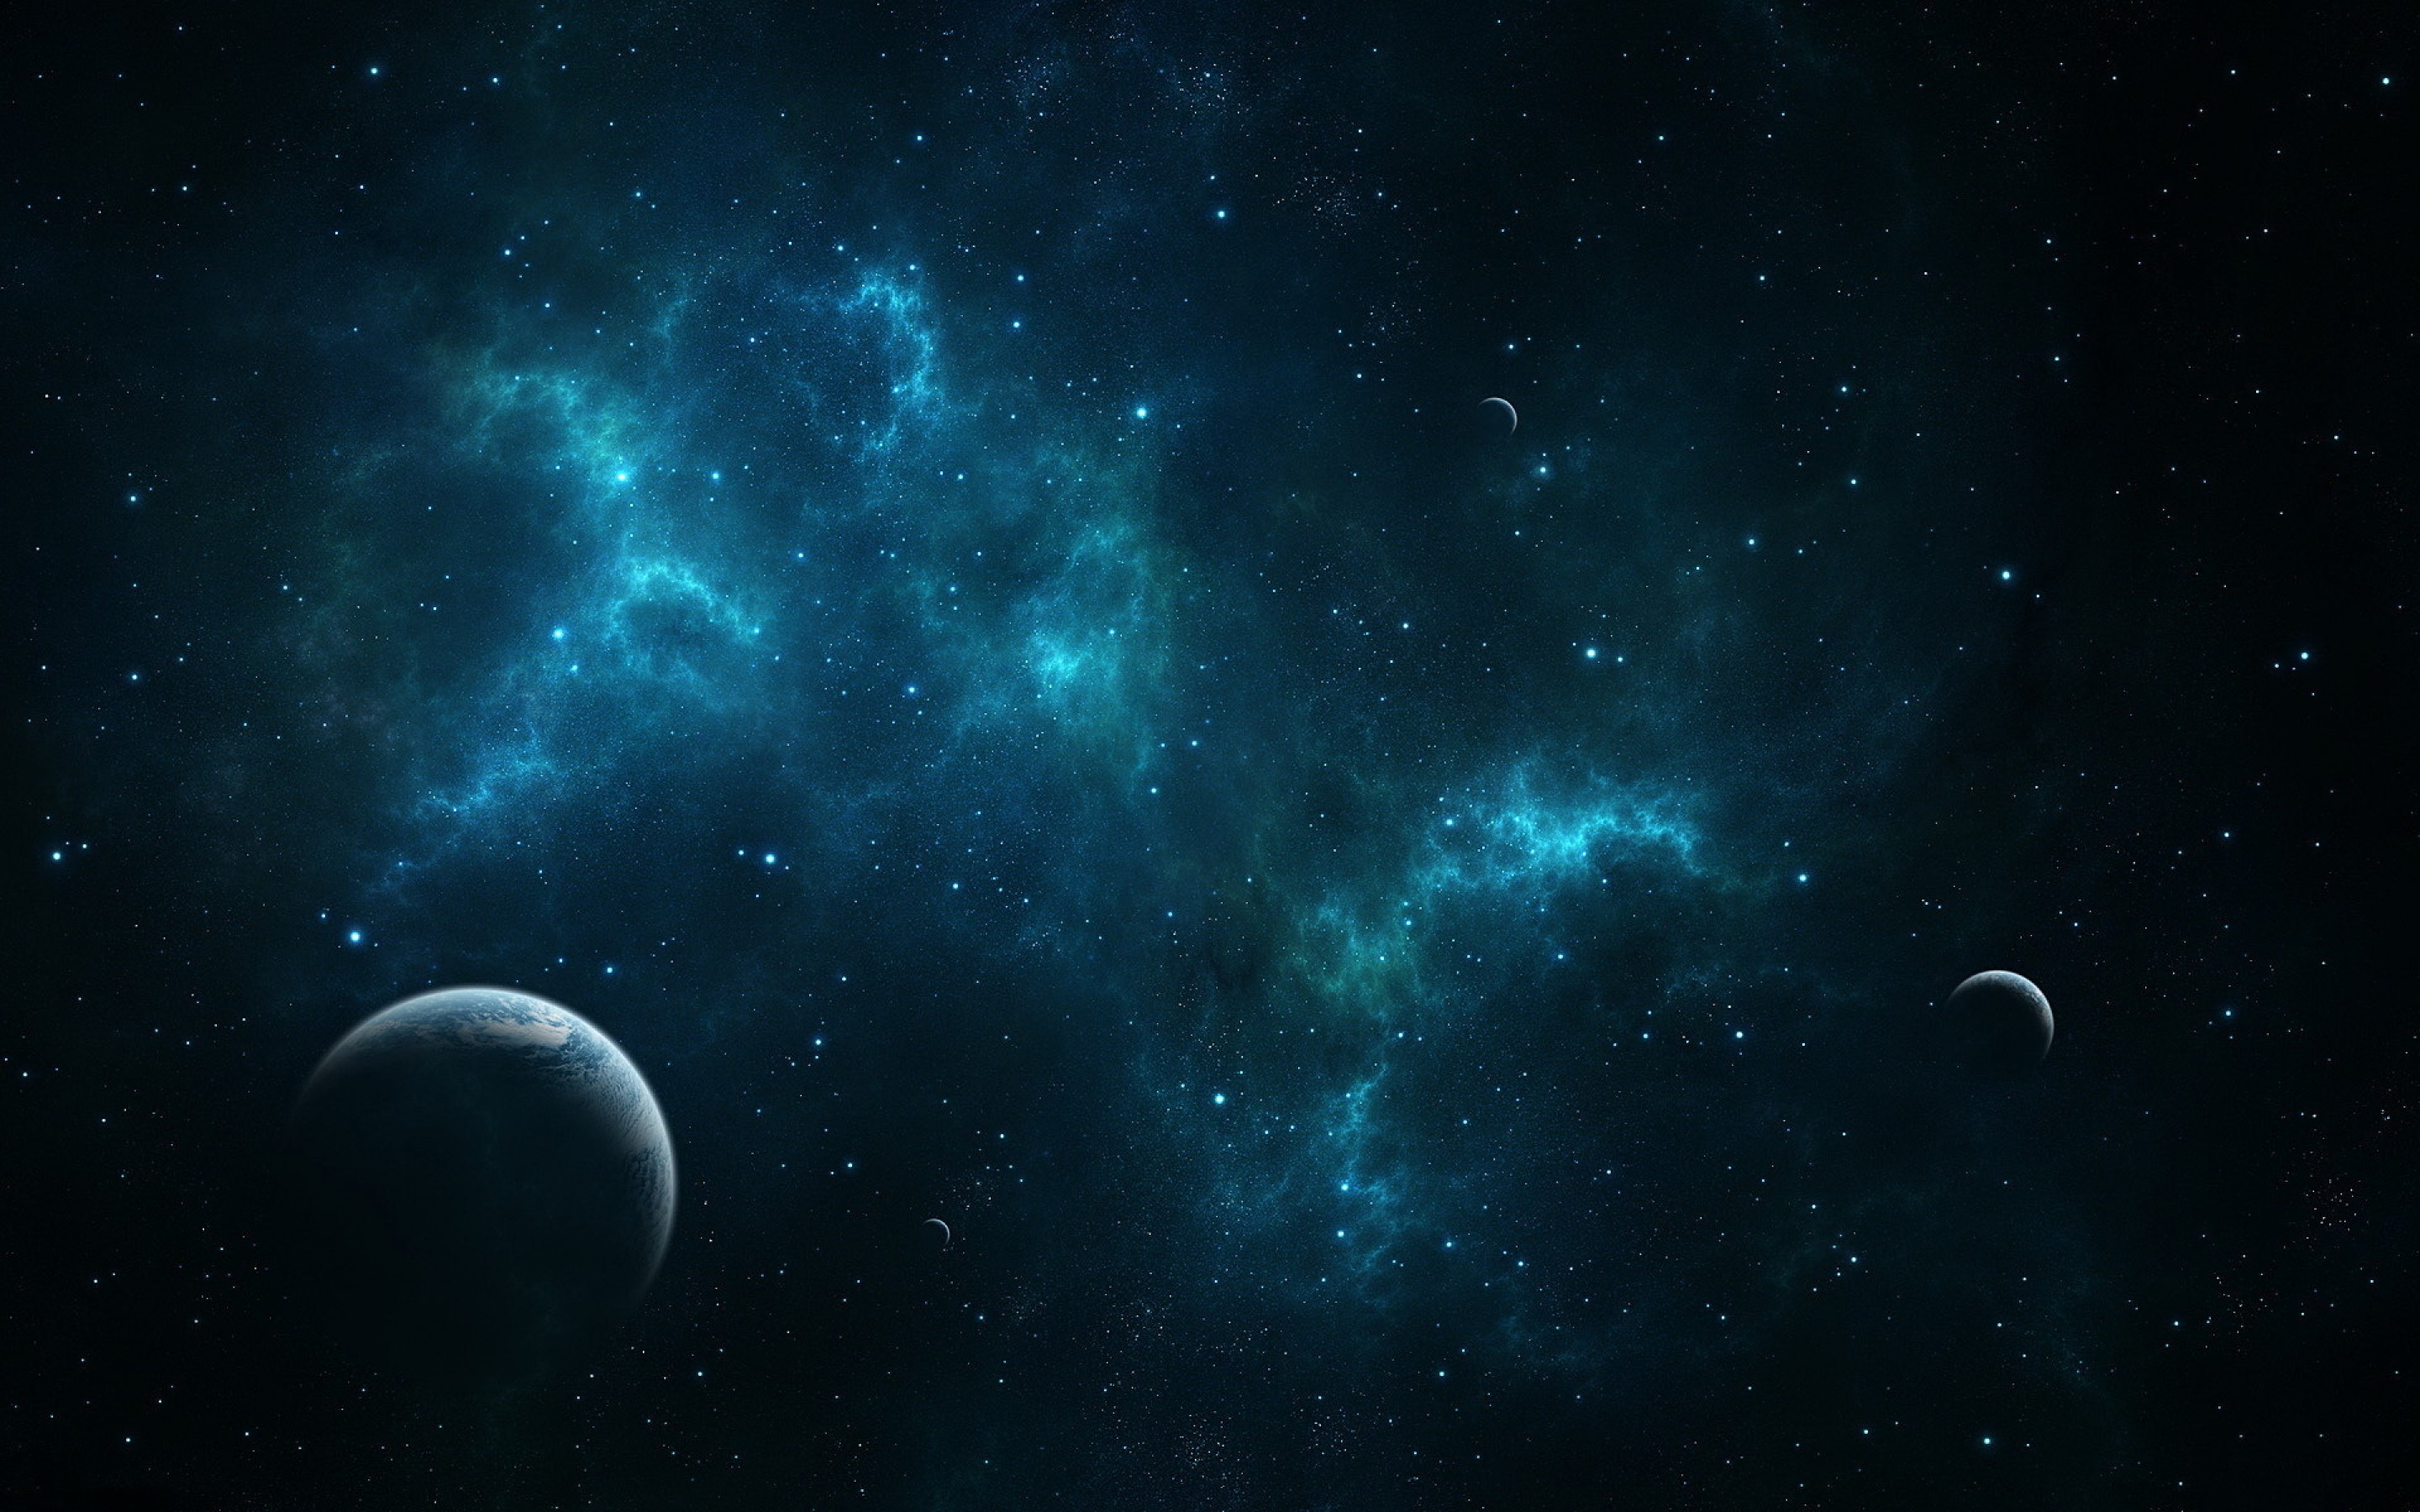 Hd Wallpapers Of Space Full Hd 1080p Desktop Backgrounds For Pc